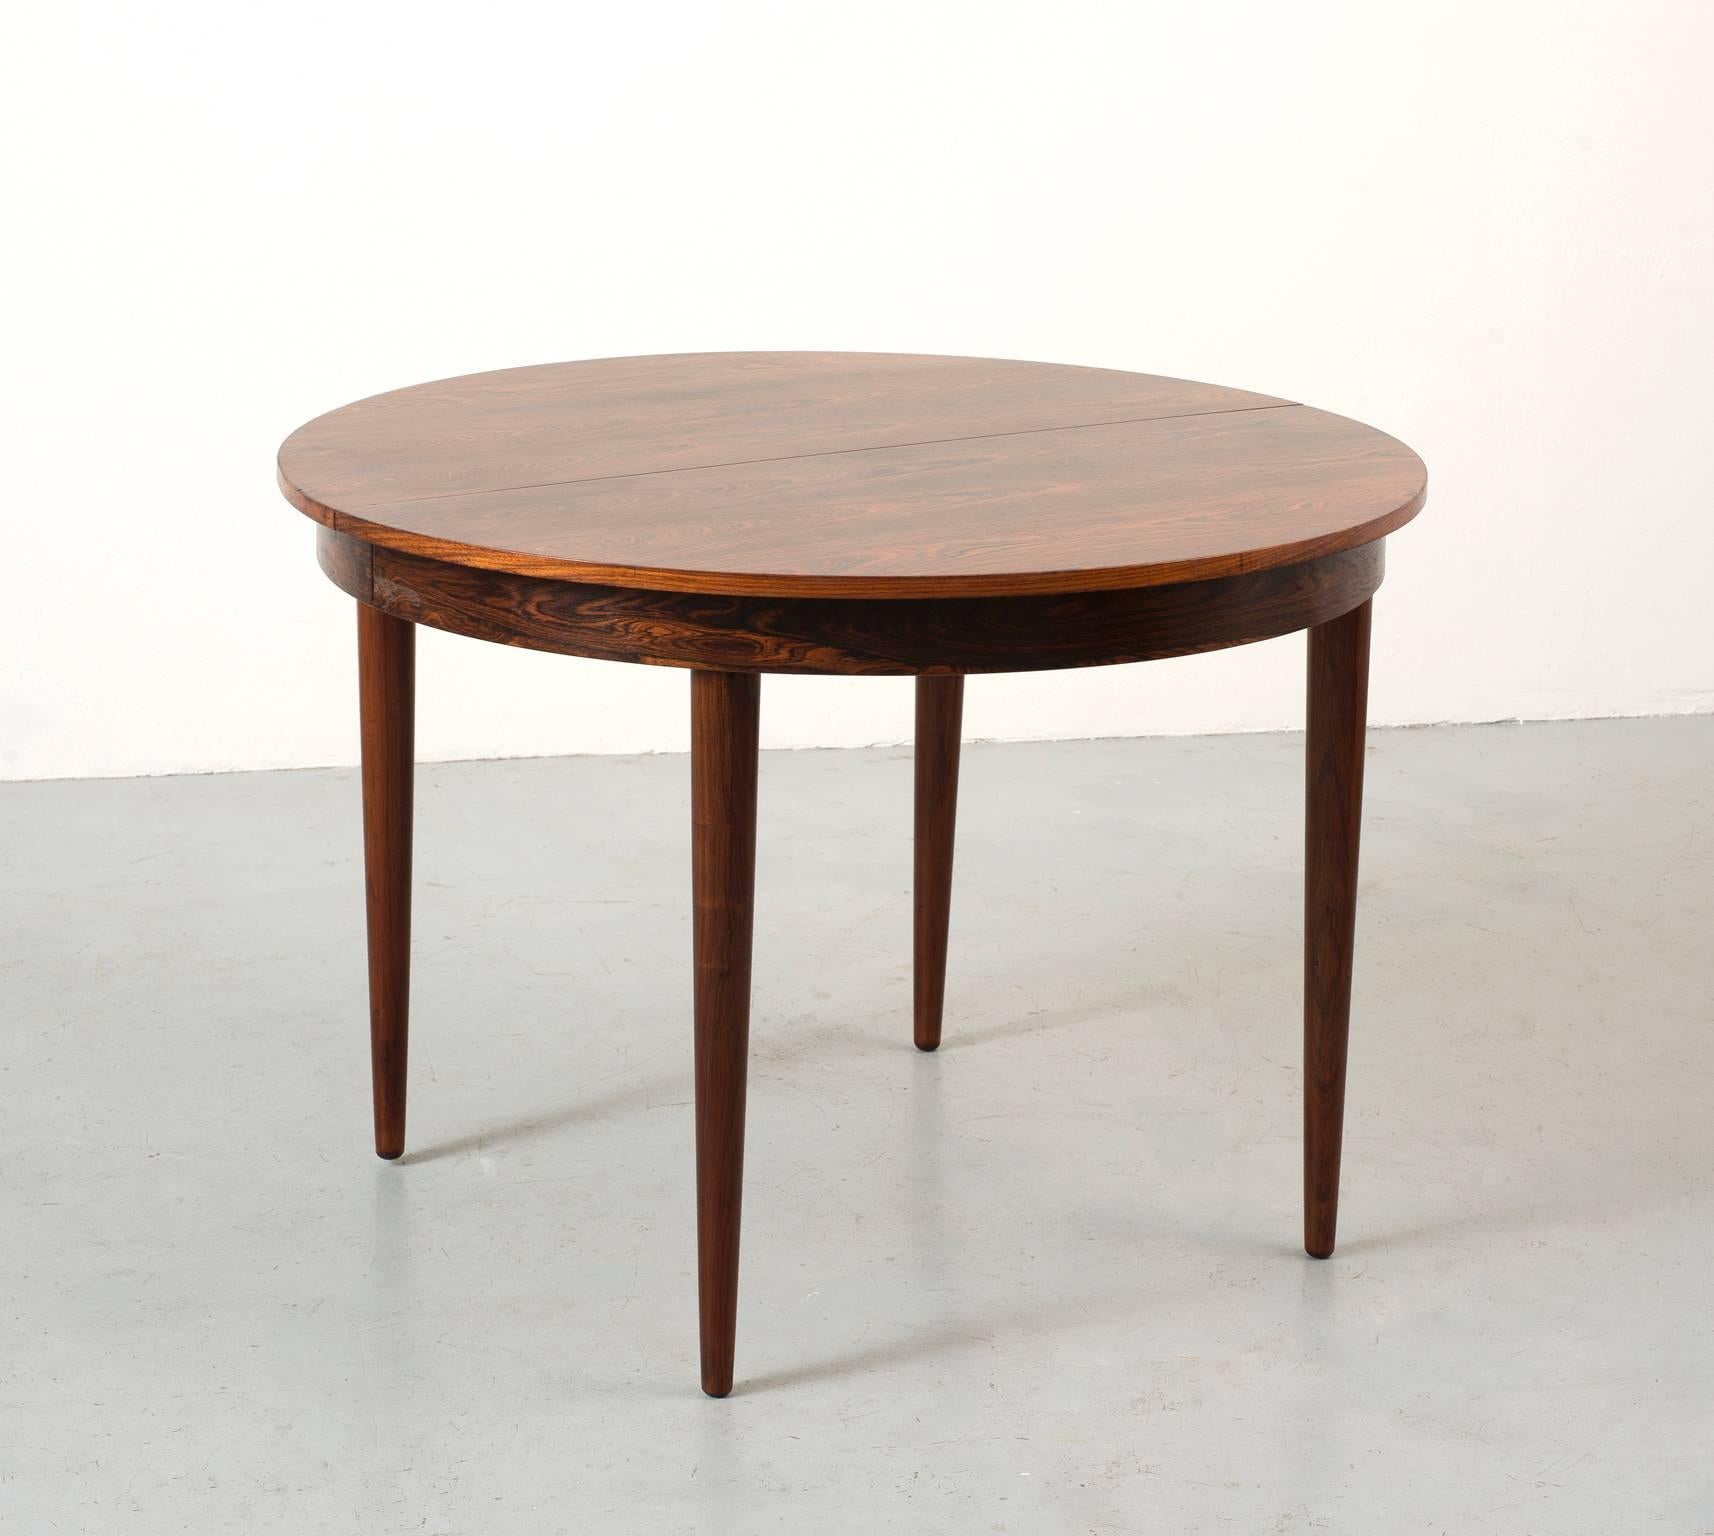 An elegant dining by Hans Olsen in bookmatched rosewood for Frem Rojle, circa 1962.

Table measures 61.75 inches when fully extended.